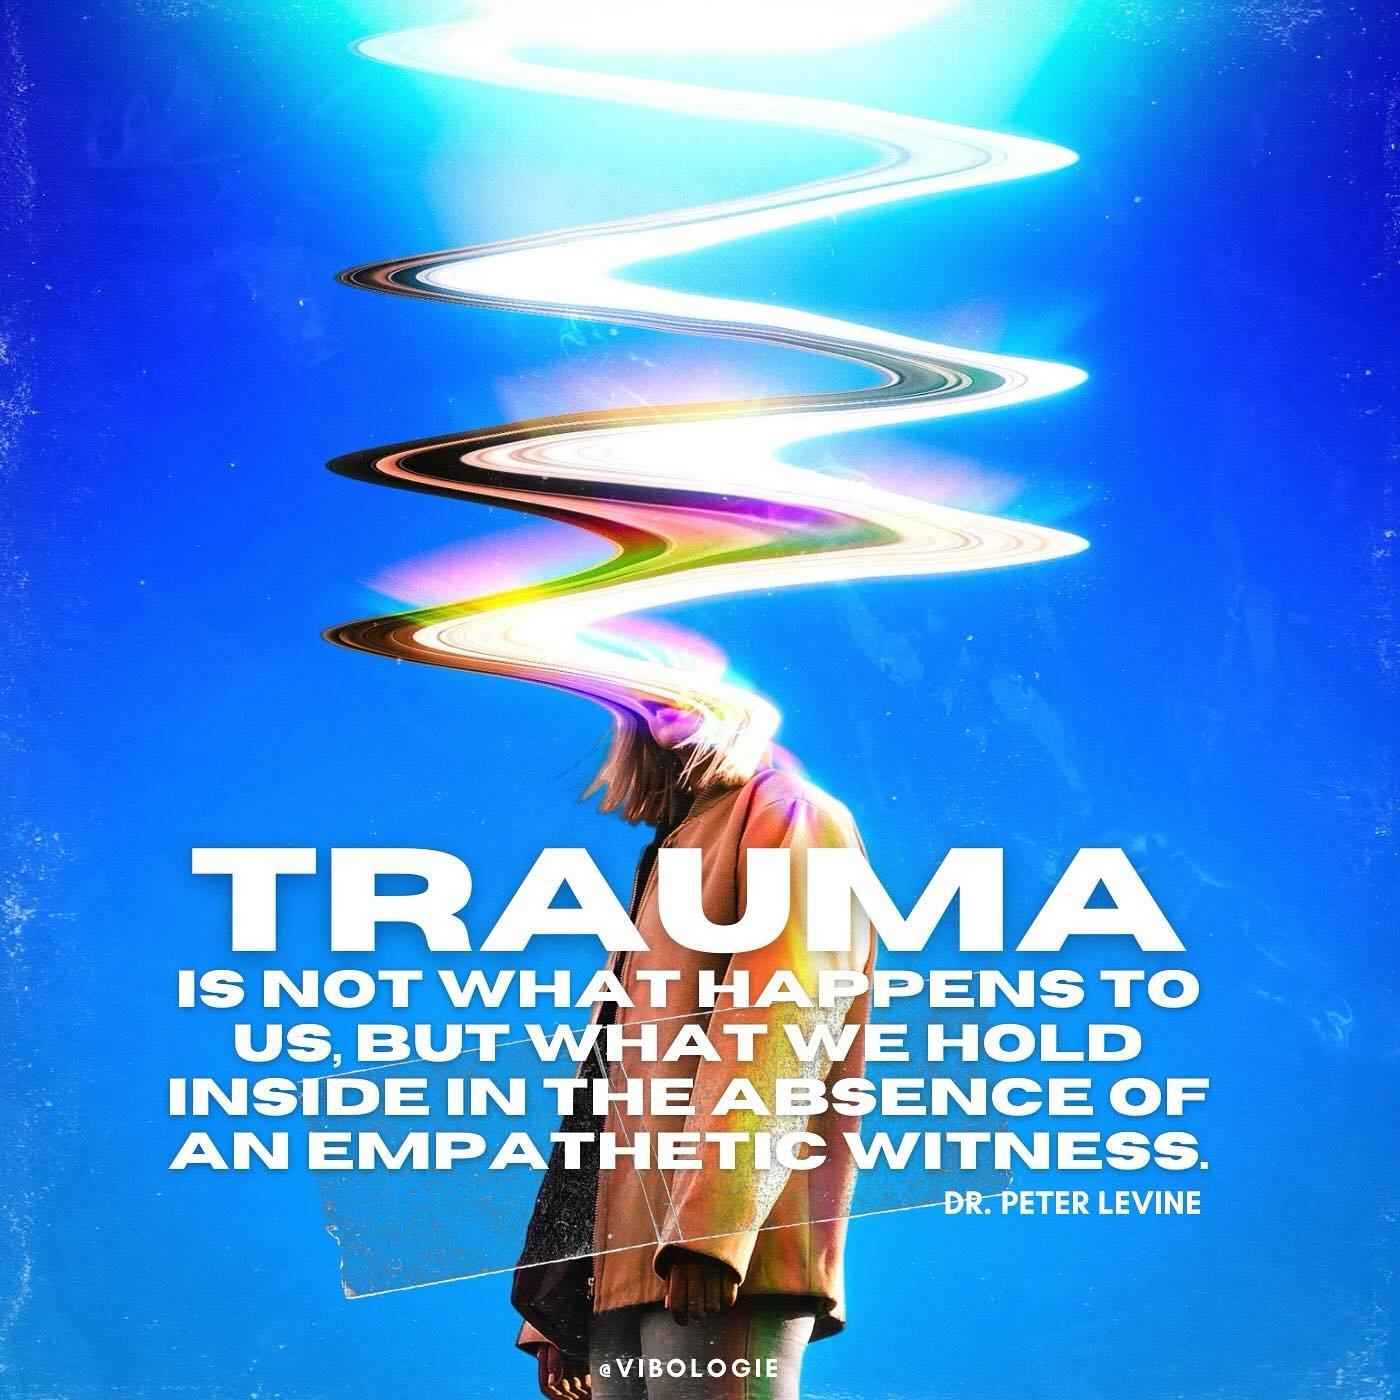 This quote is so powerful. 

Trauma is what WE hold inside. So only we have the power to release it and we will only release it when the nervous system feels it&rsquo;s safe to do so. ❤️&zwj;🩹 

WE have to become an empathetic witness to our own exp